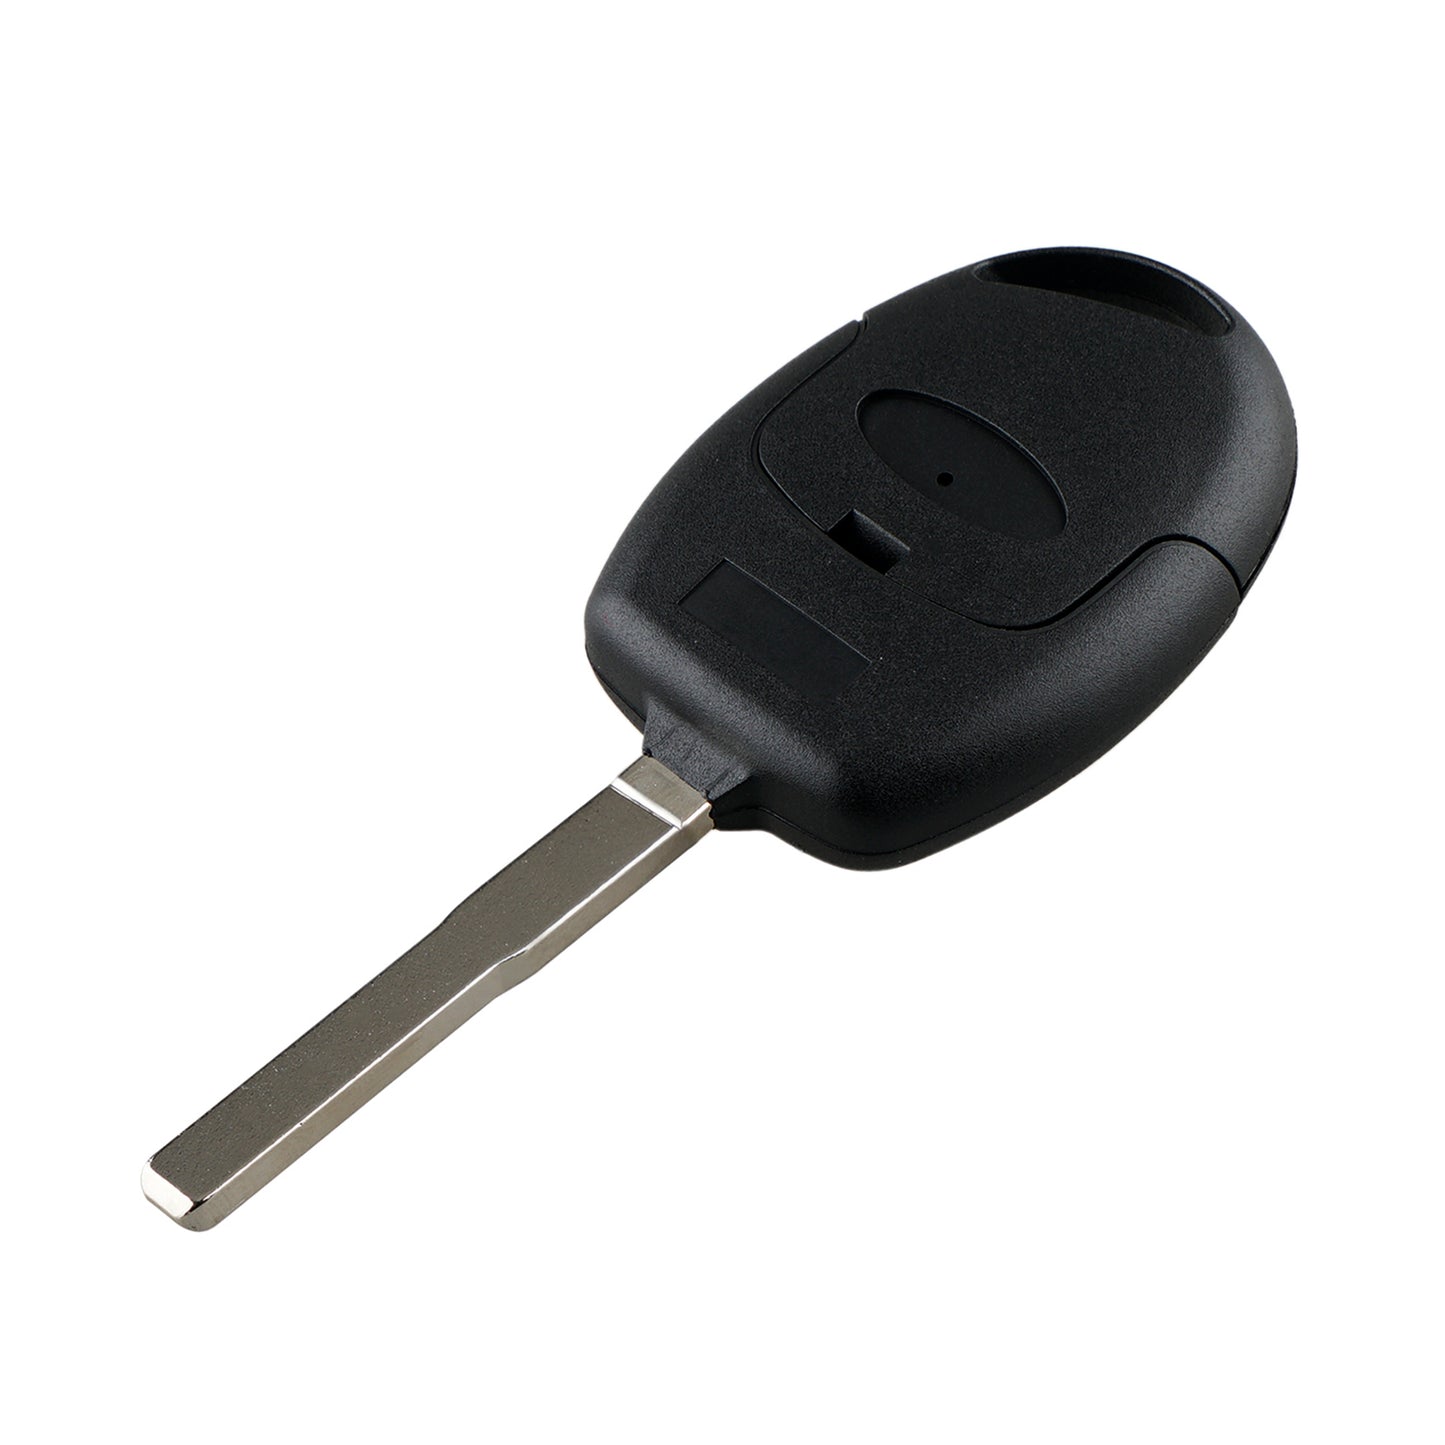 3 Buttons 433MHz Smart Keyless Entry Car Fob Remote Key For Ford Focus Fiesta Mondeo Galaxy C S Max SKU : J120